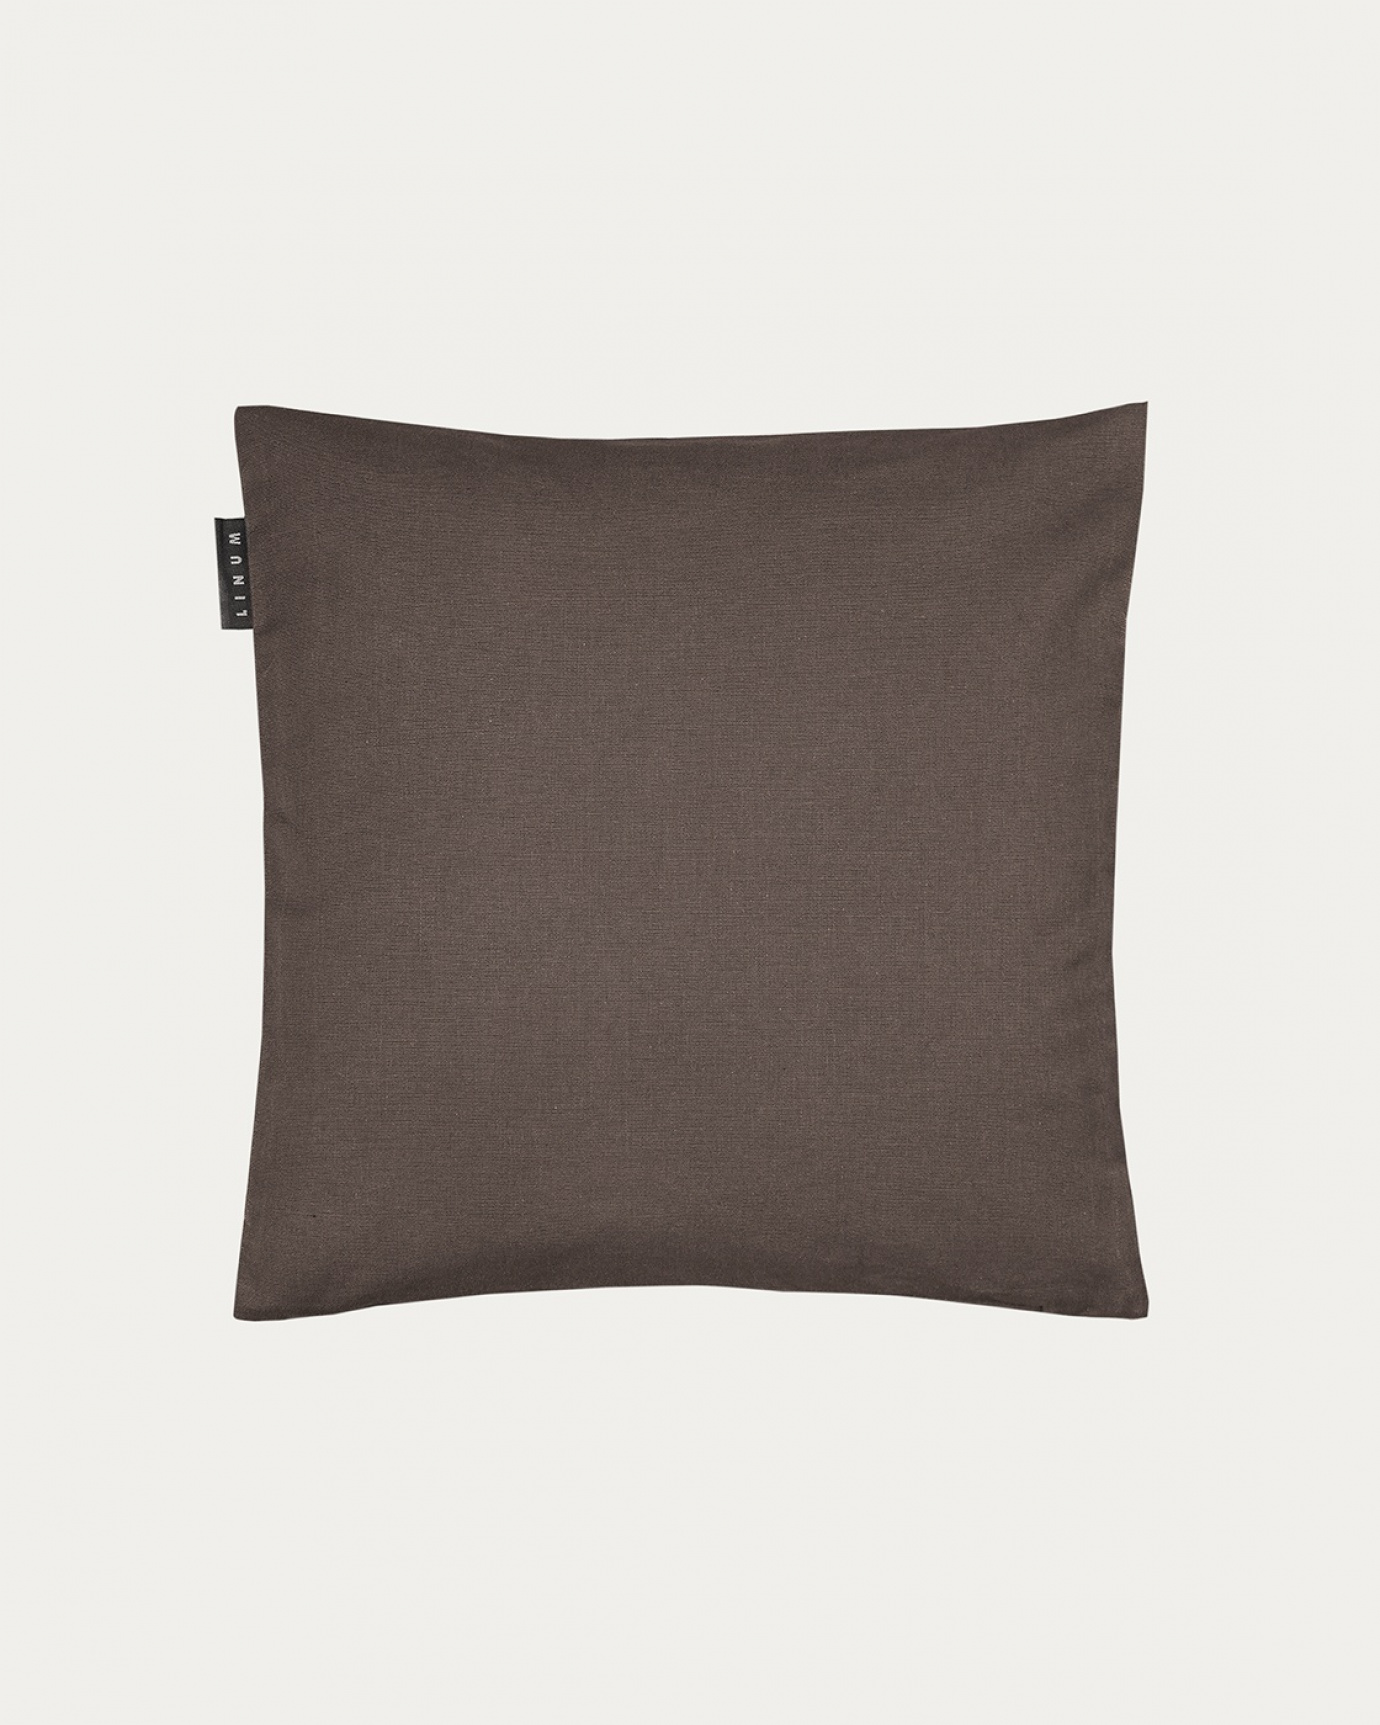 Product image bear brown ANNABELL cushion cover made of soft cotton from LINUM DESIGN. Size 40x40 cm.